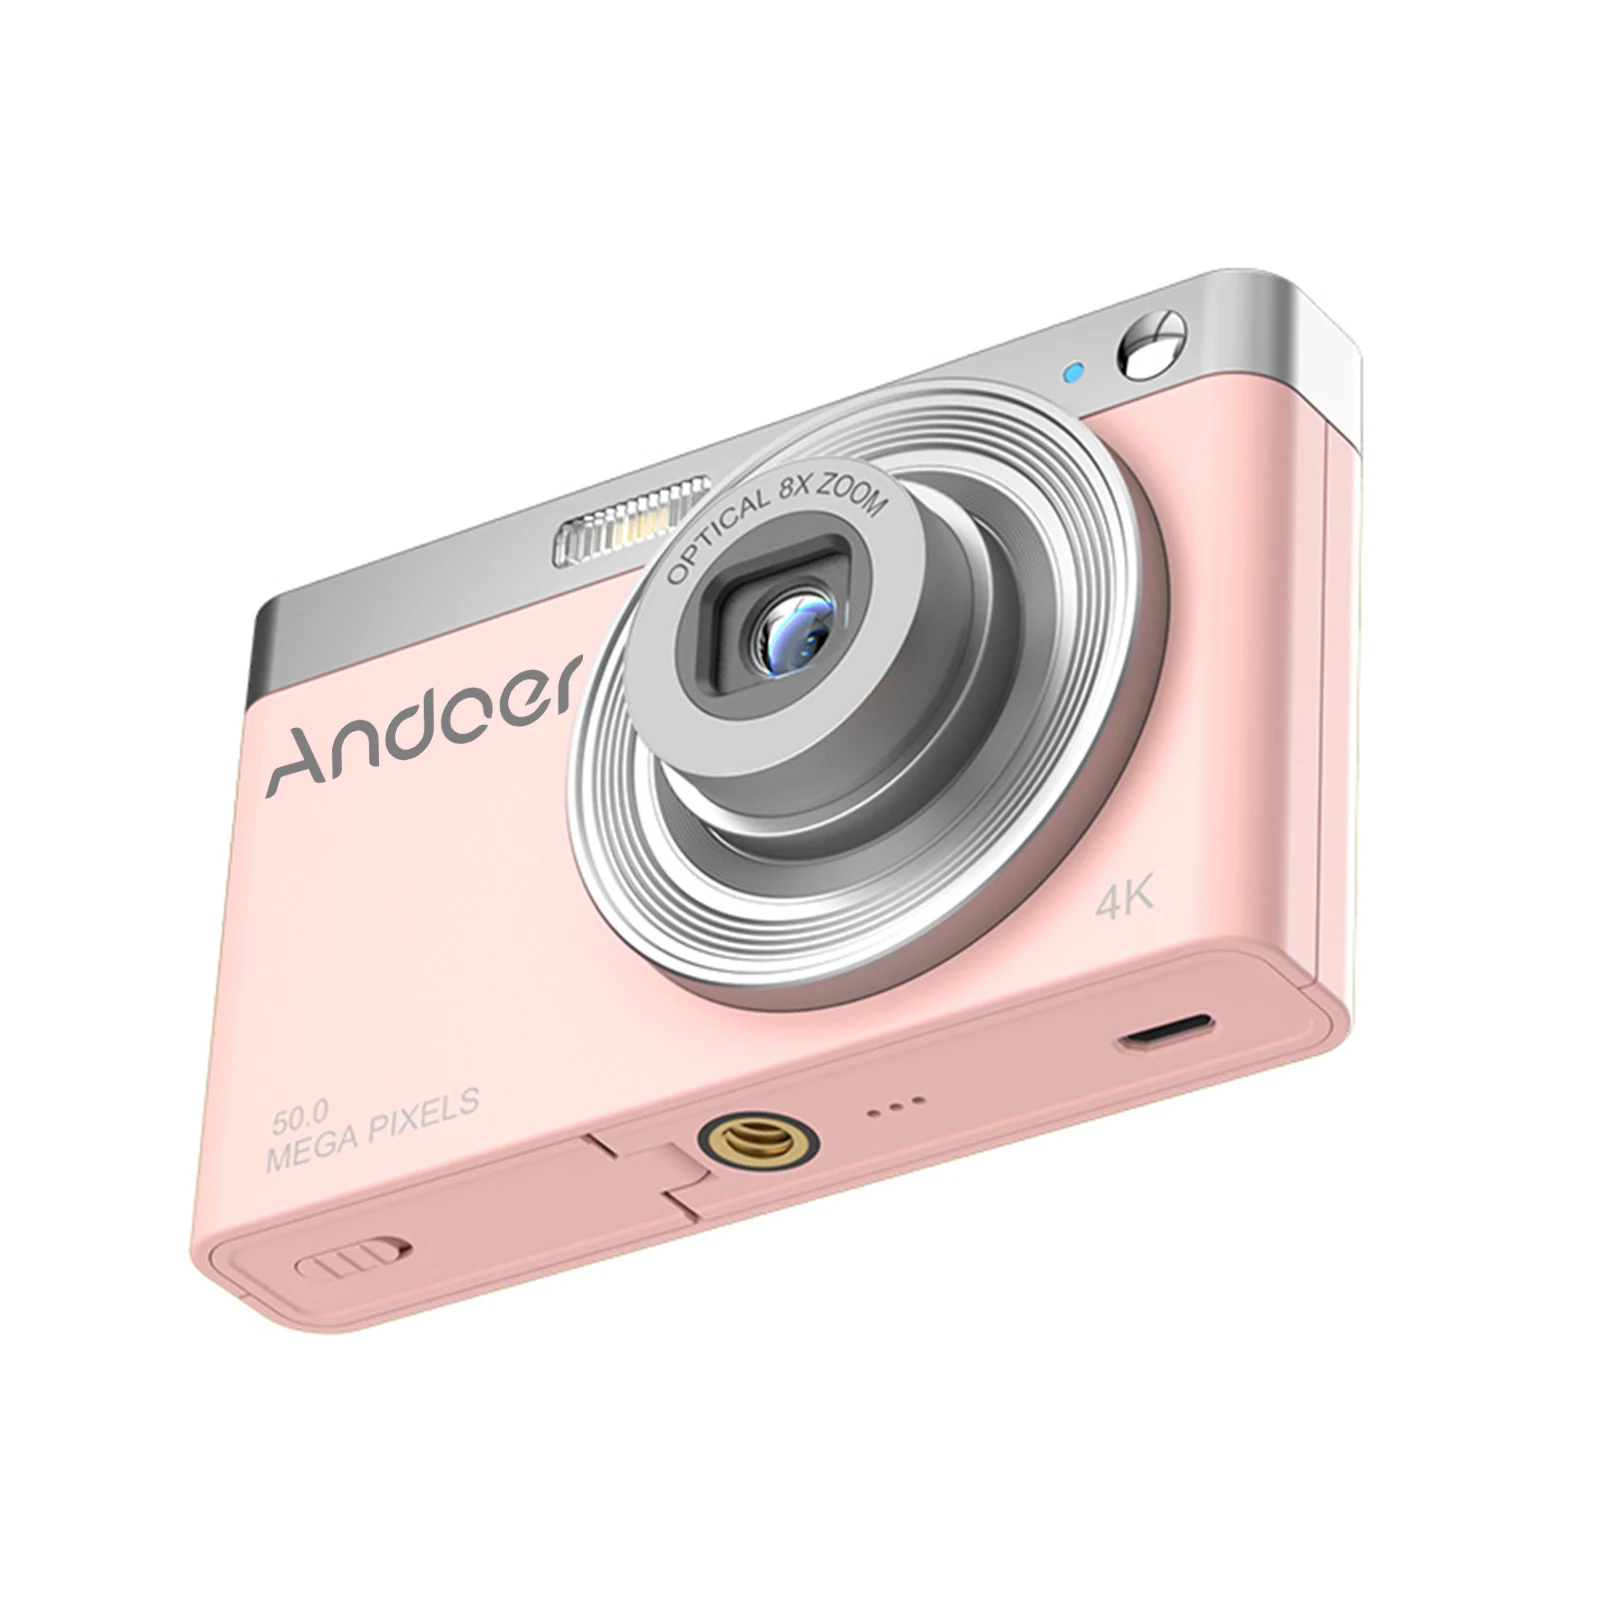 Andoer Digital Camera Portable 4K 50MP Video CamcorderAuto Focus 16X Zoom Anti-shake Face Detect Built-in Flash with Batteries